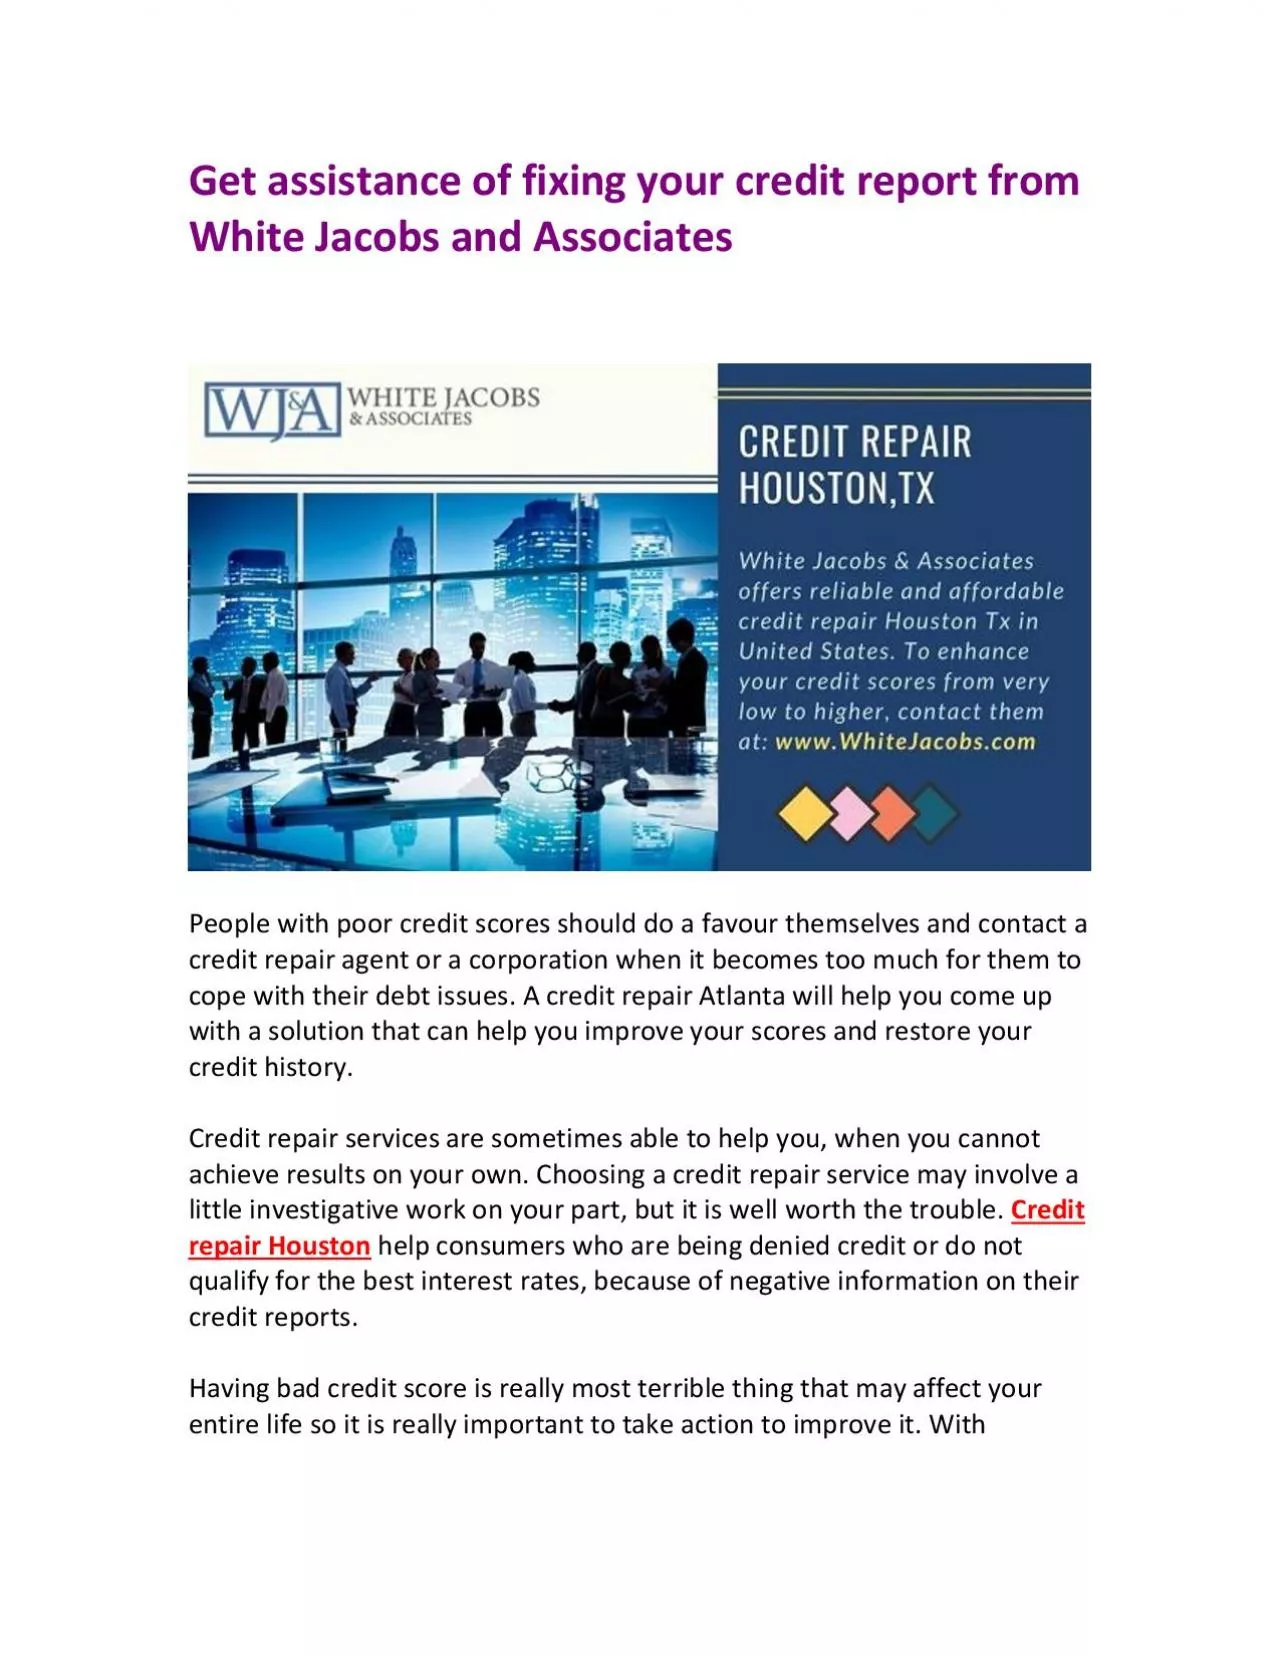 Get assistance of fixing your credit report from White Jacobs and Associates